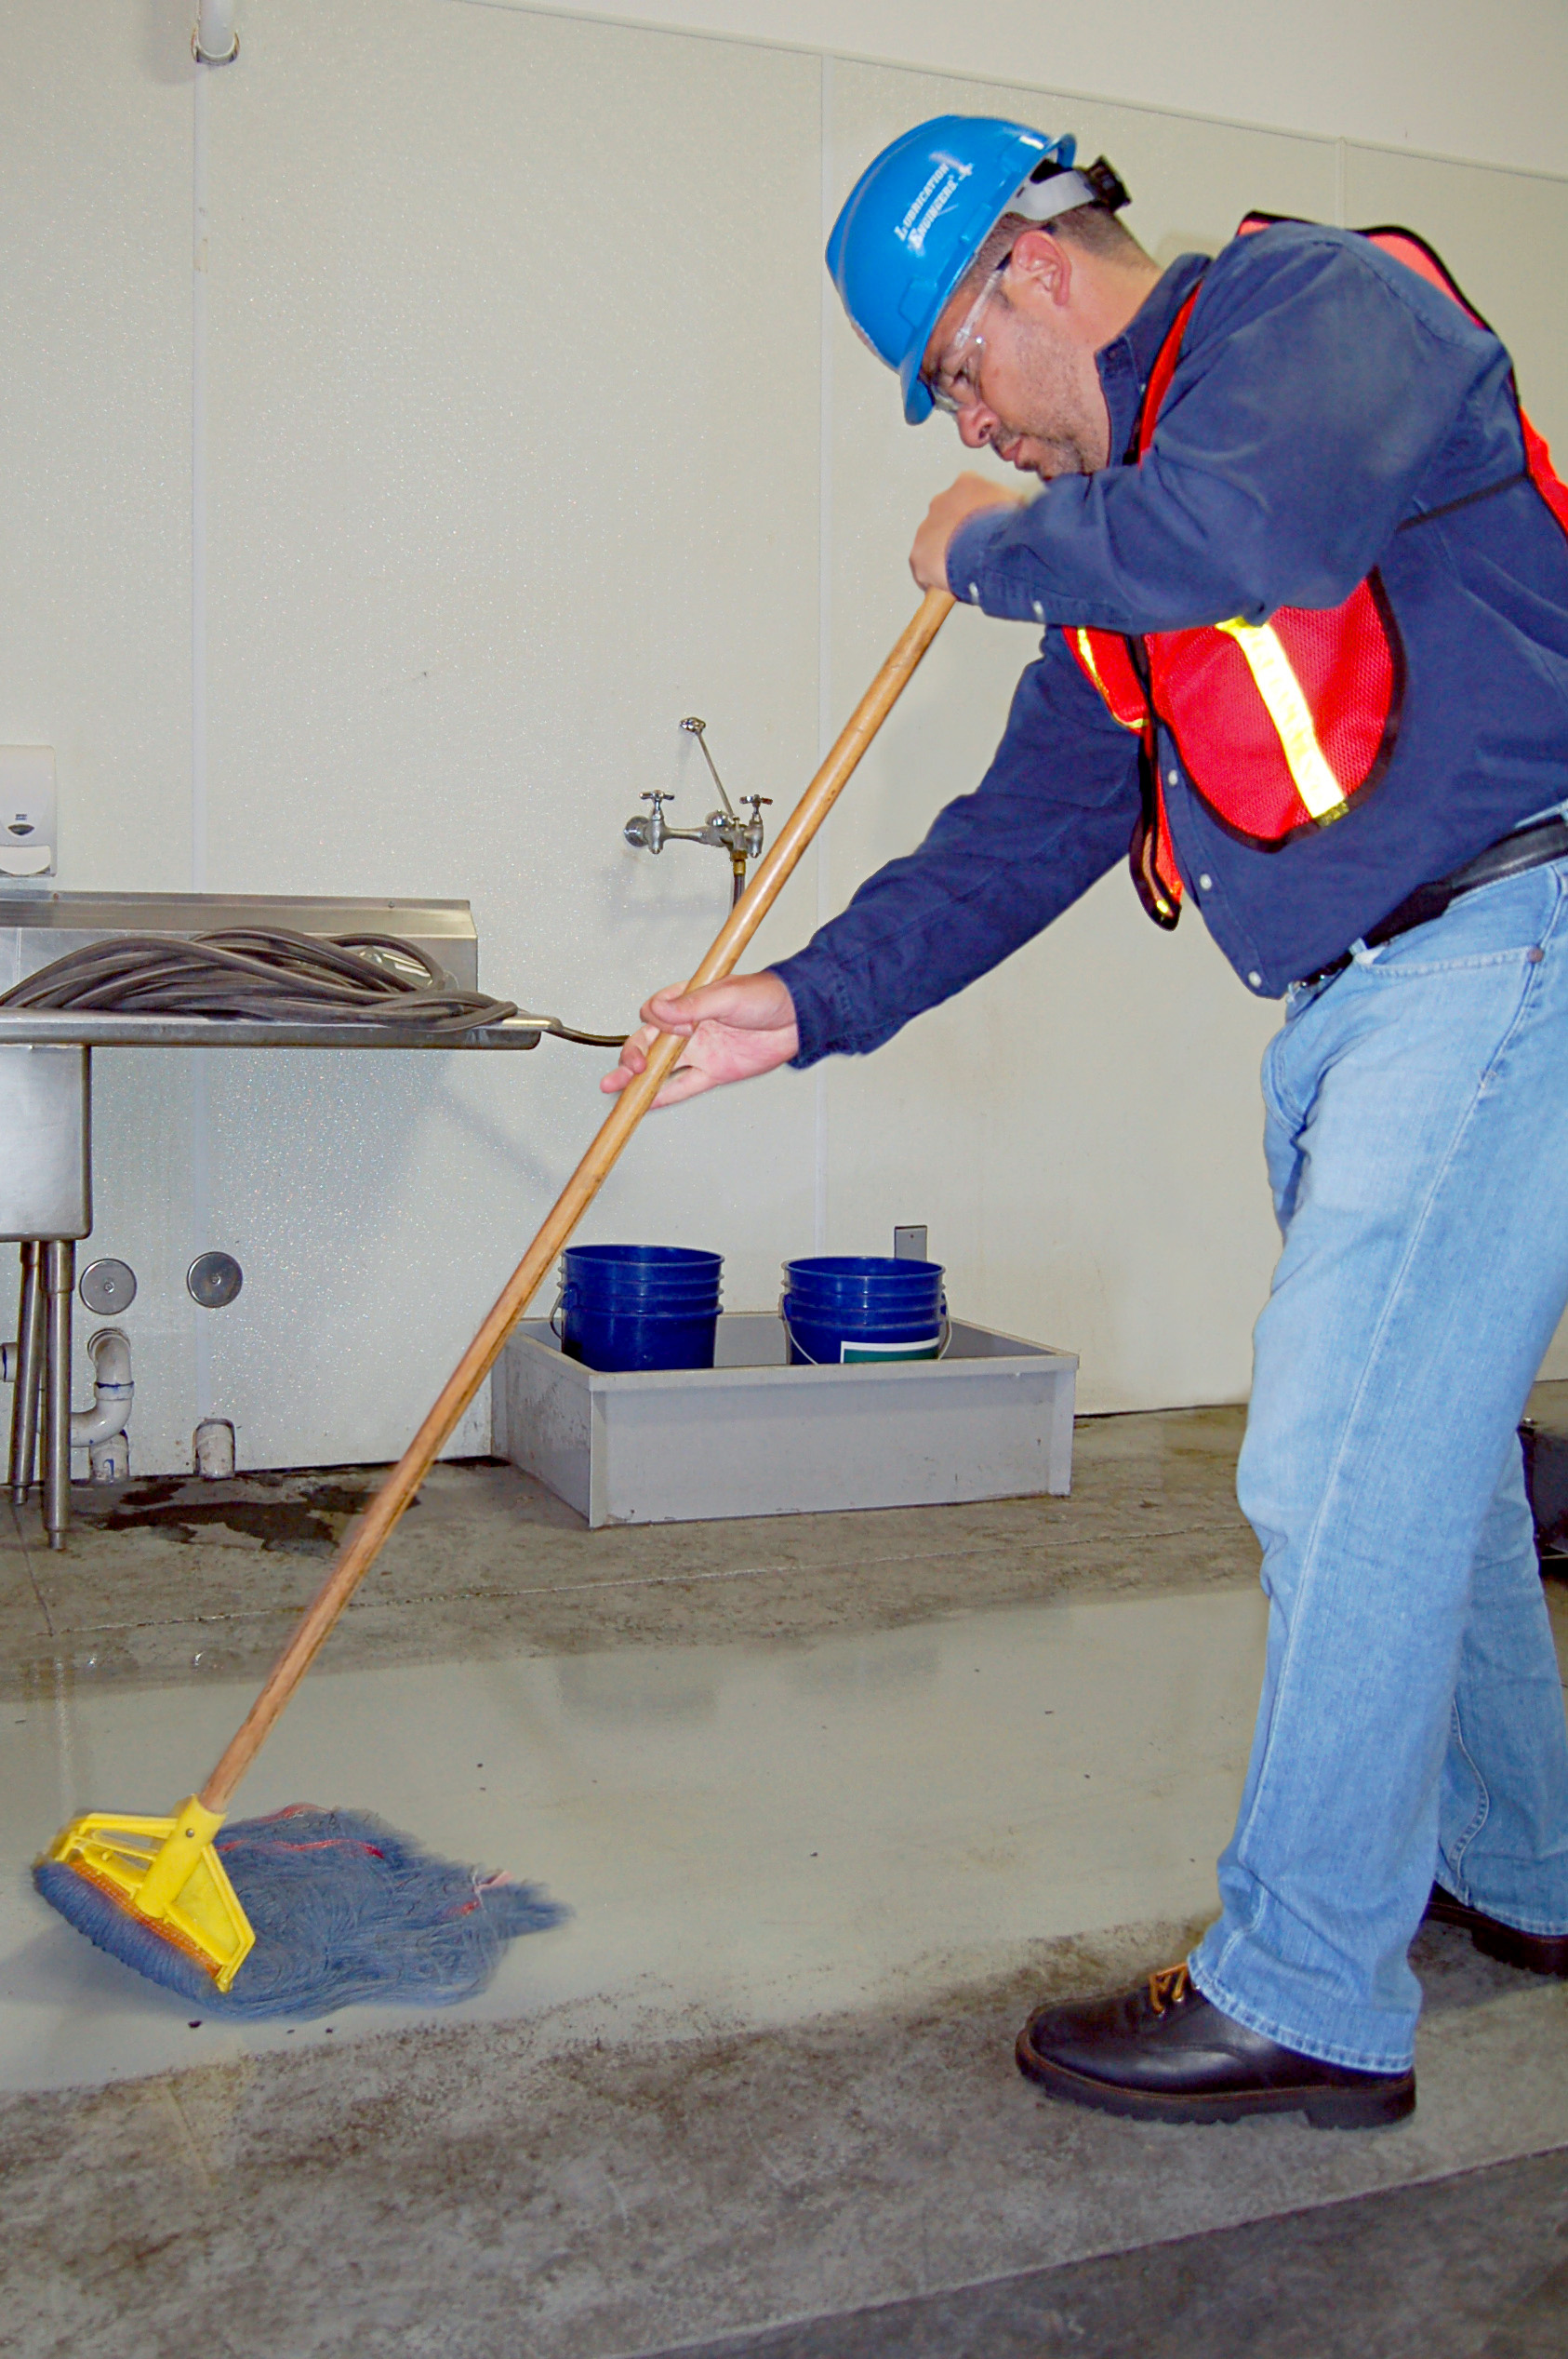 Greentastic Industrial Cleaner is easy to apply with a power sprayer, floor scrubber, mops, cloths or brushes.